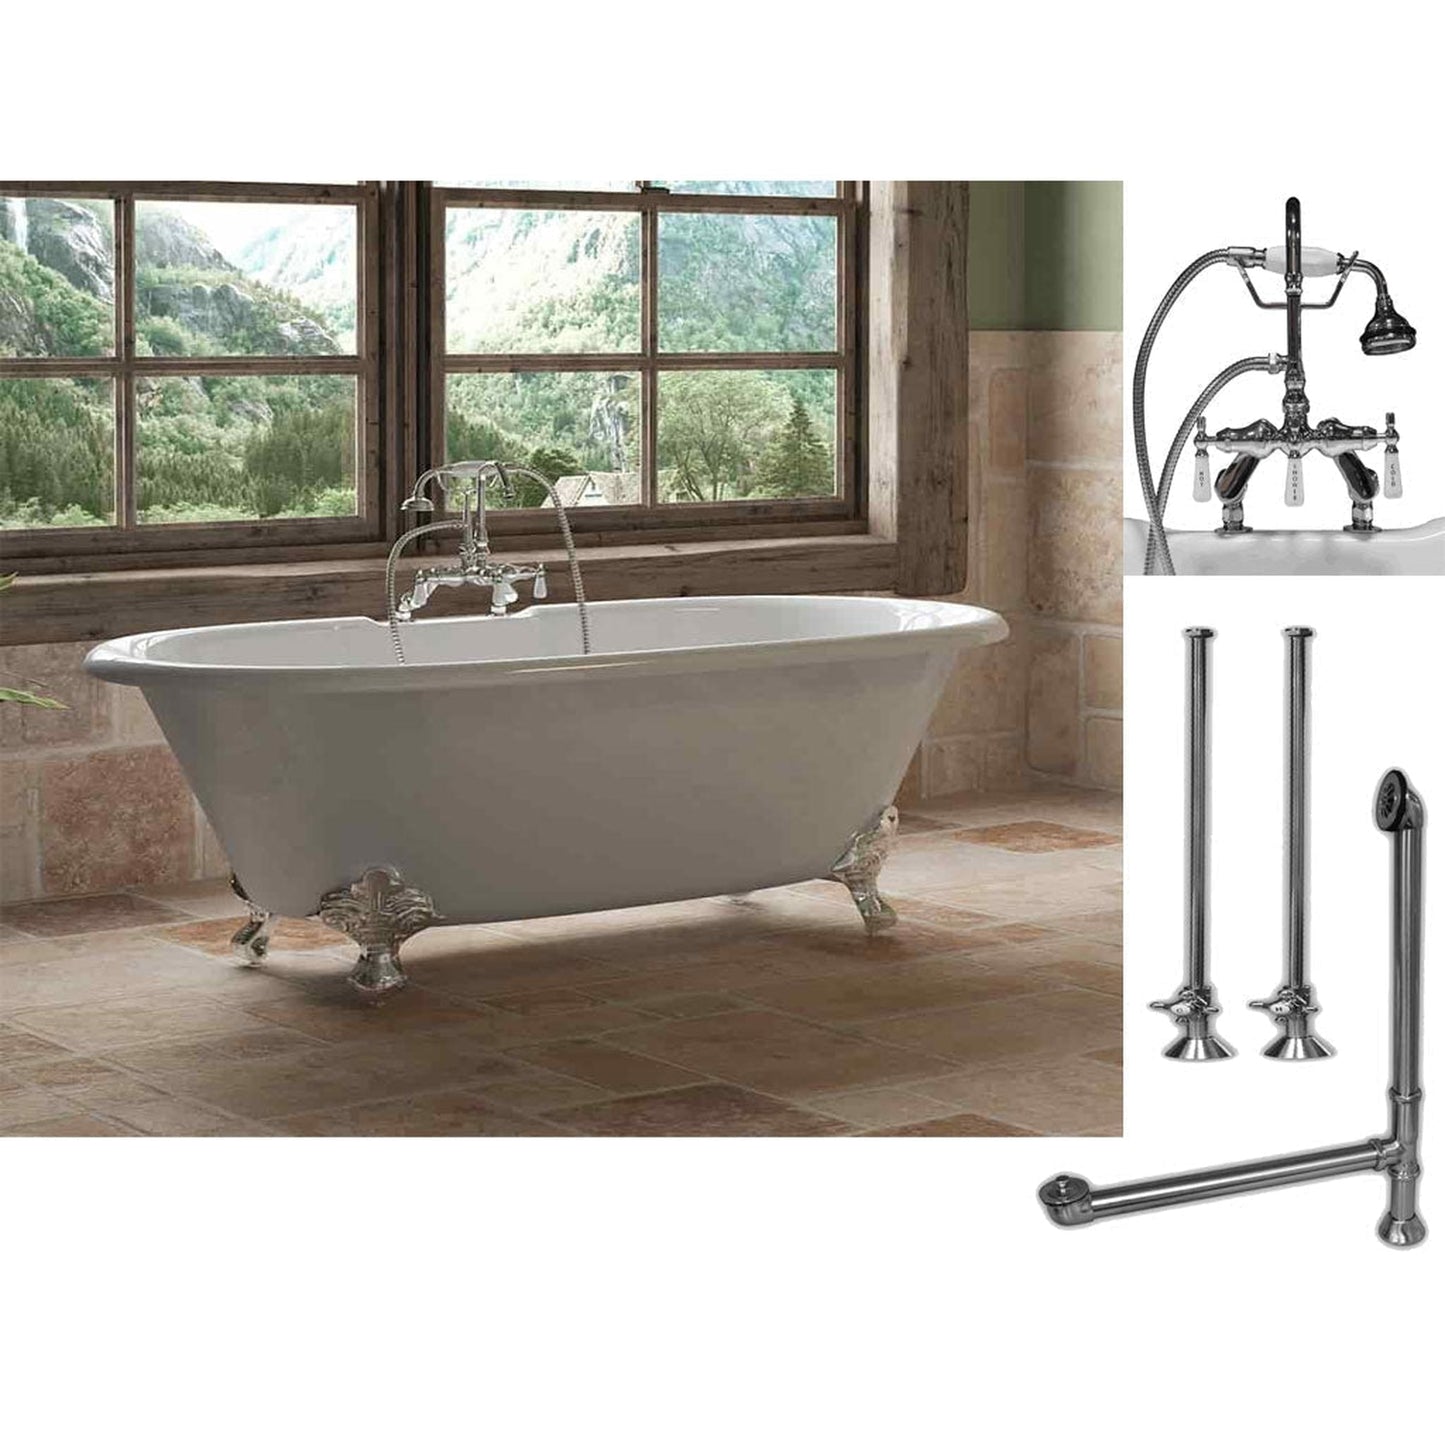 Cambridge Plumbing 67" White Cast Iron Double Ended Clawfoot Bathtub With Deck Holes And Complete Plumbing Package Including Porcelain Lever English Telephone Brass Faucet, Supply Lines, Drain And Overflow Assembly In Polished Chrome